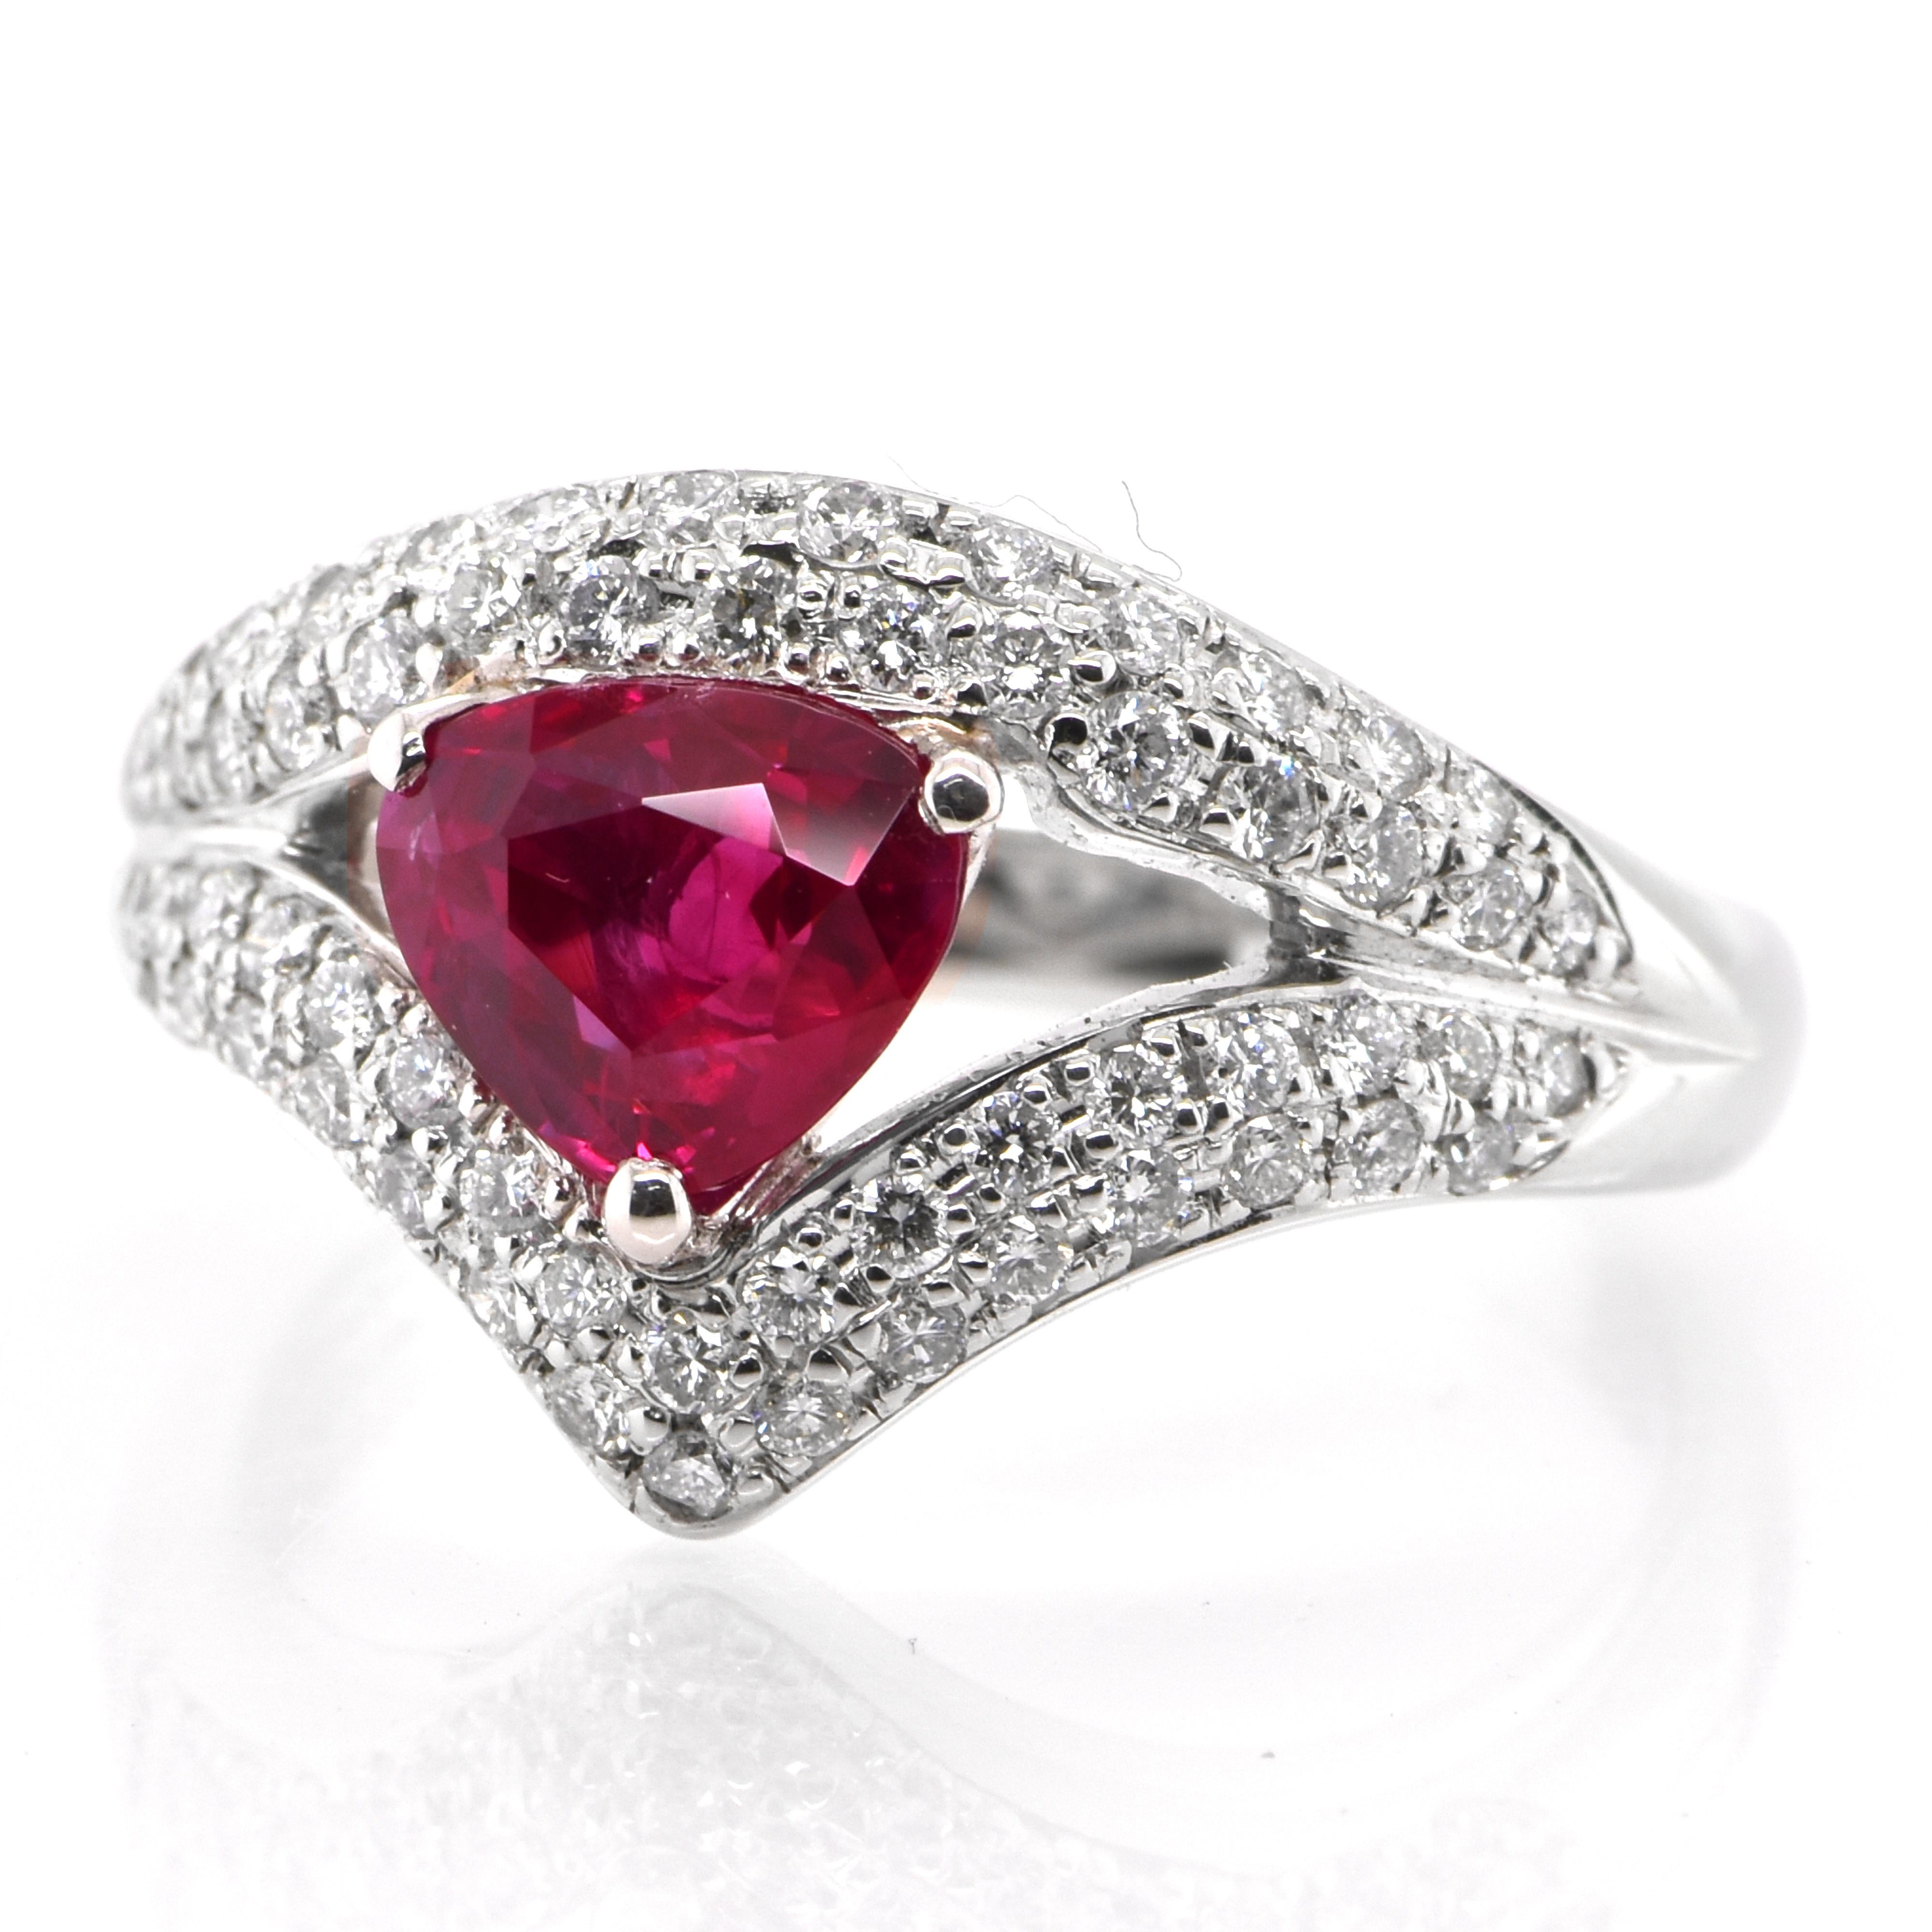 A beautiful Ring set in Platinum featuring a GIA Certified 1.49 Carat Natural Burmese Ruby and 0.48 Carat Diamonds. Rubies are referred to as 